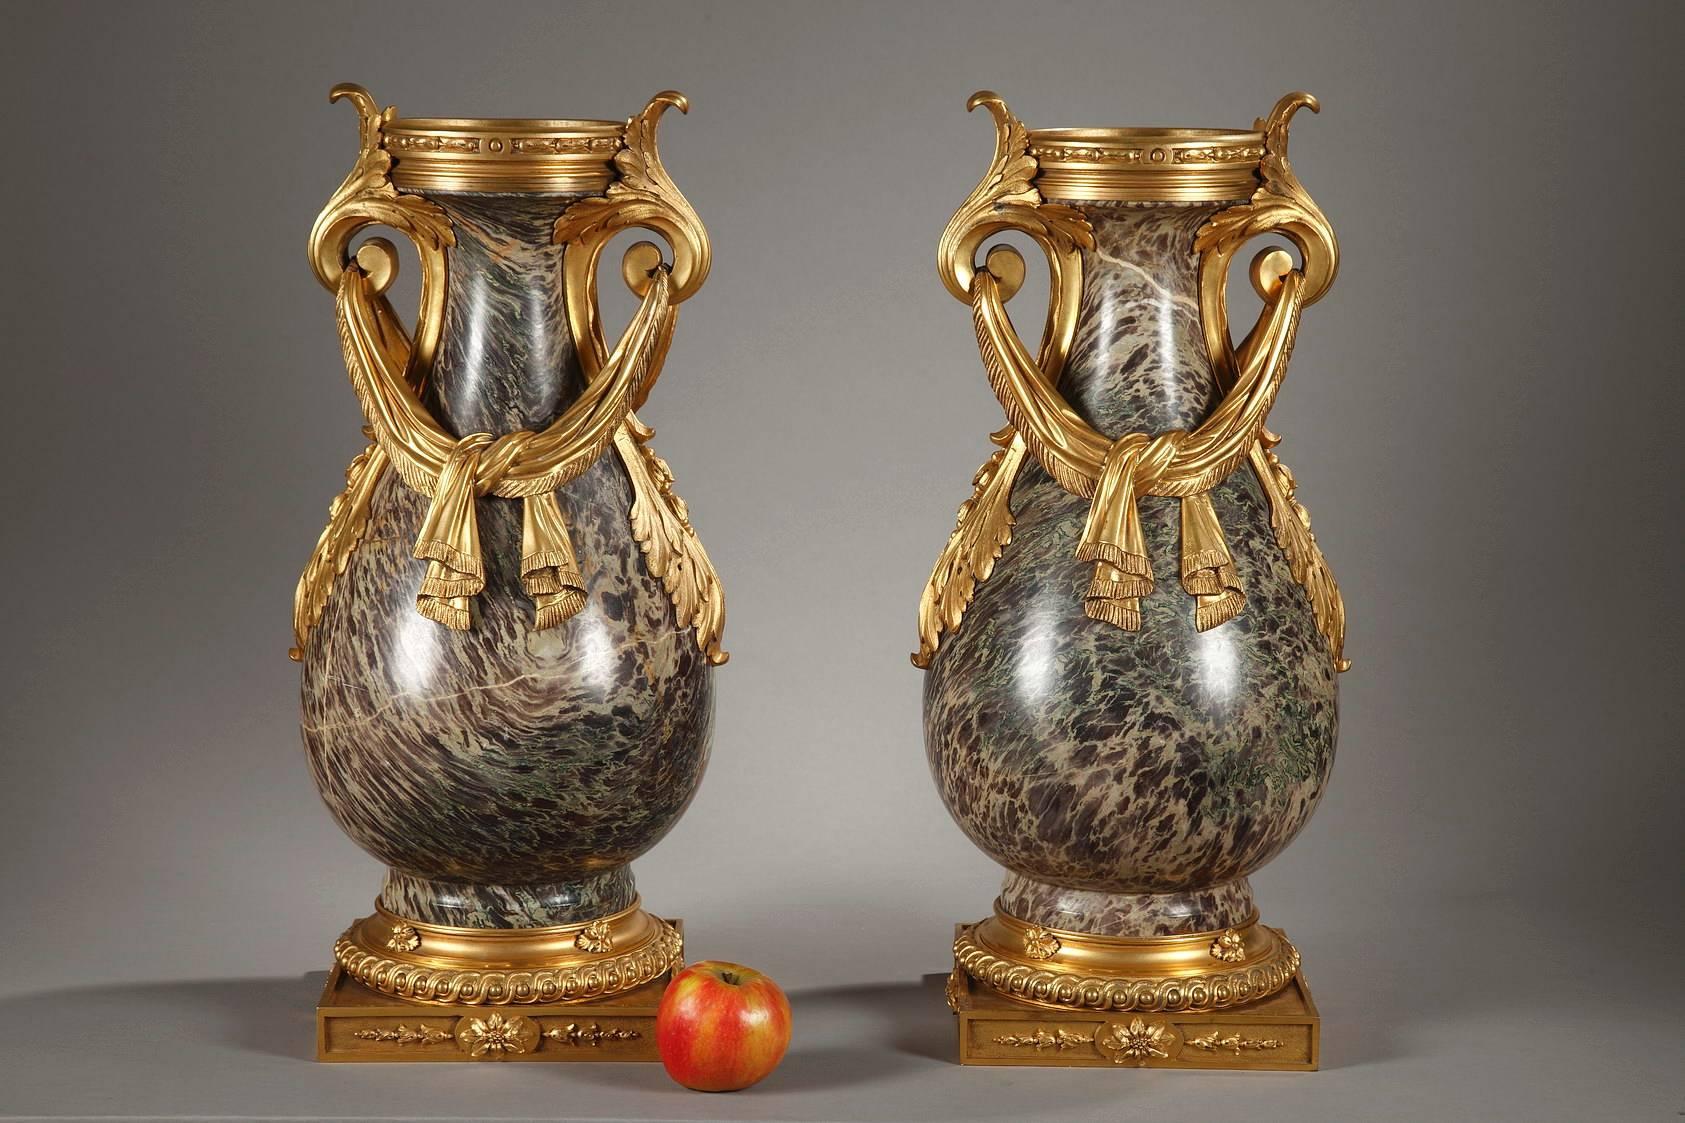 Pair of large, ornamental jasper urns from Russia with ormolu mounts. The handles are formed with scrolling acanthus leaves and they hold in place a piece of loosely tied drapery, which descends on both sides of the paunch. Each vase rests on a